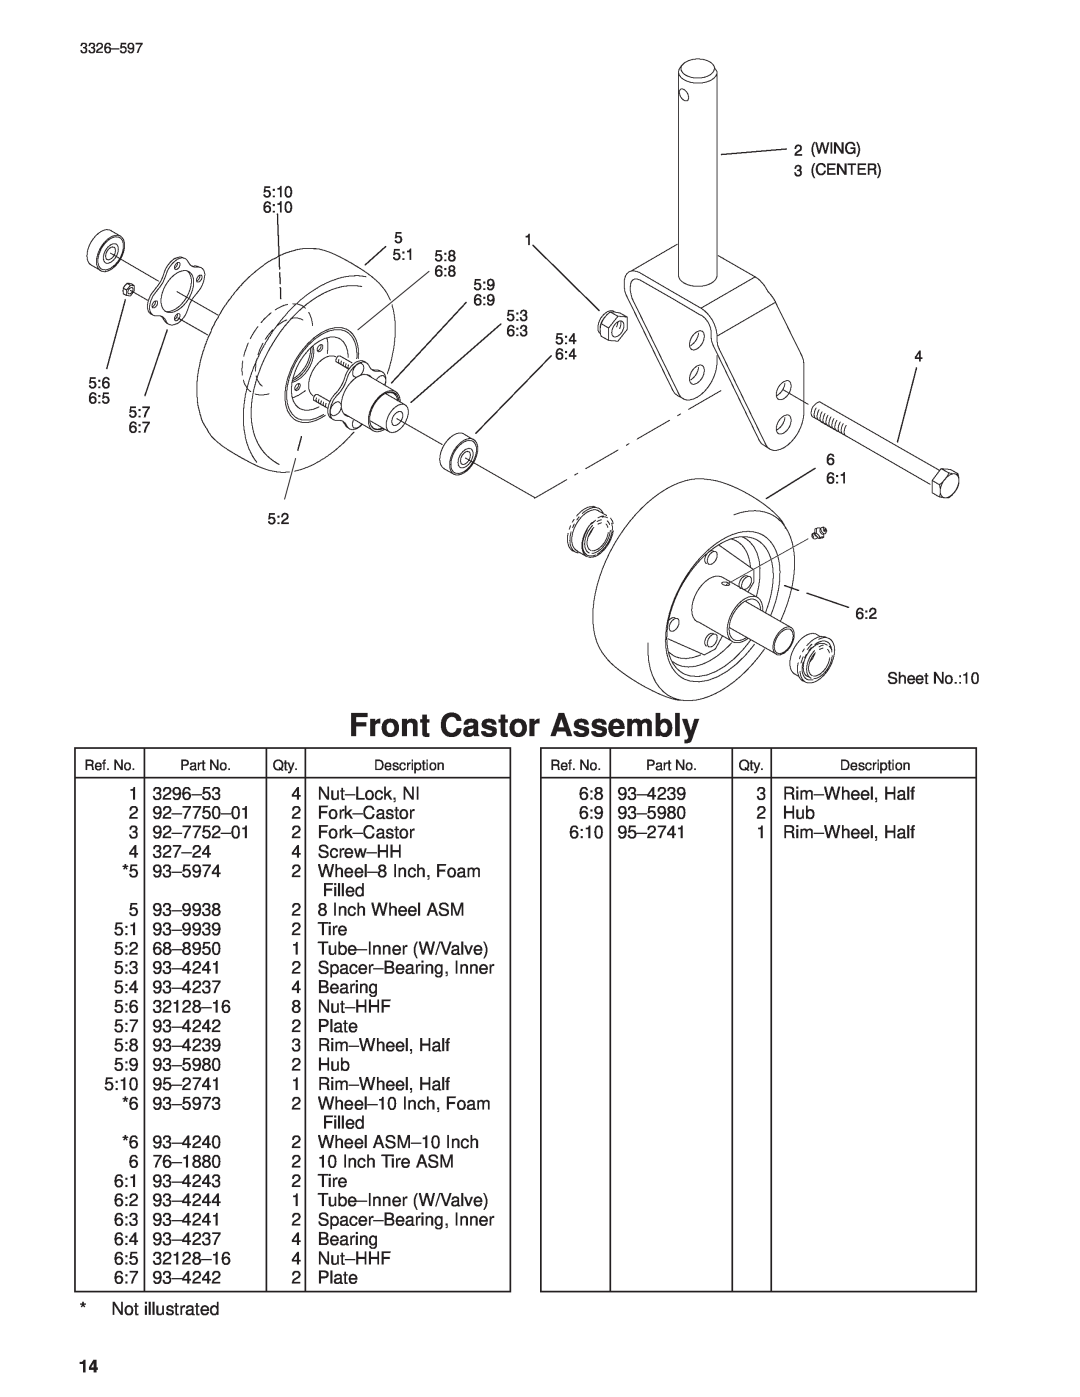 Toro 30402210000001 and Up manual Front Castor Assembly, Sheet No.10 